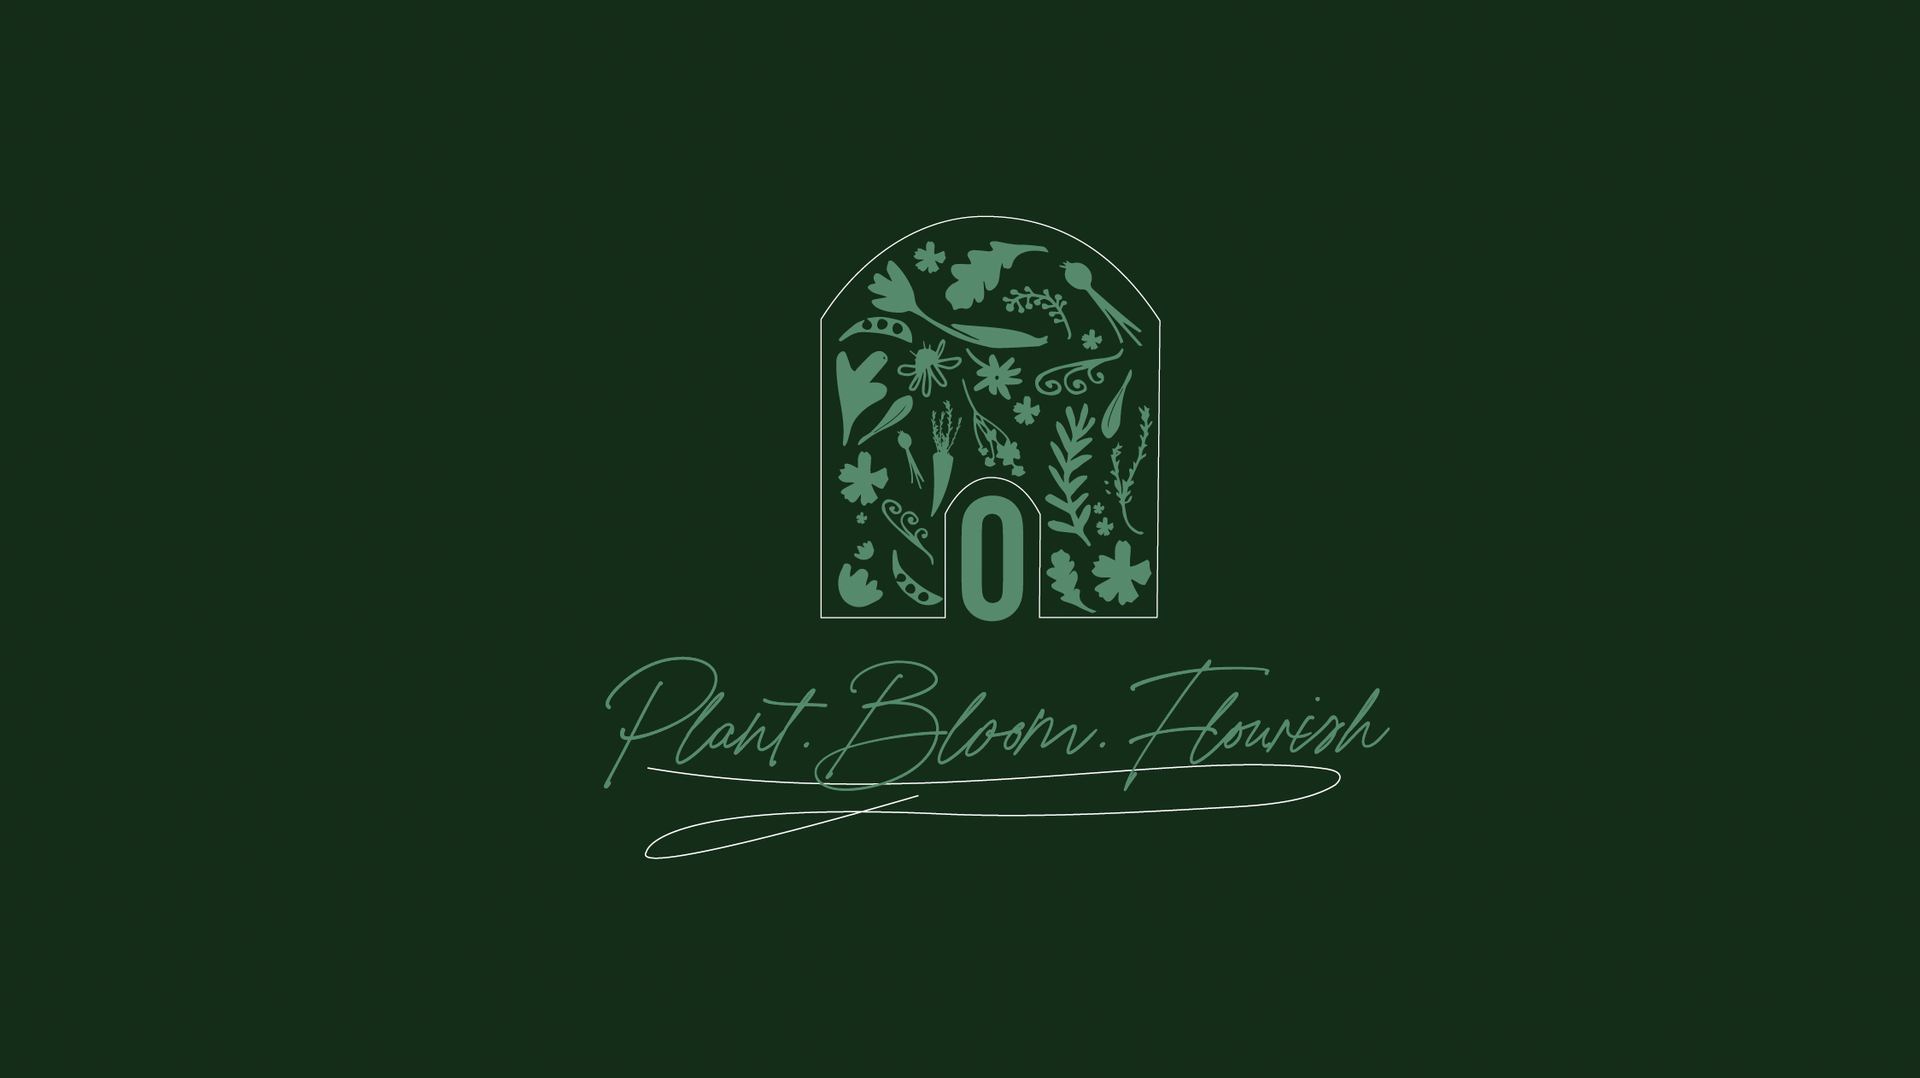 A logo for a company called plant bloom flowers on a green background.